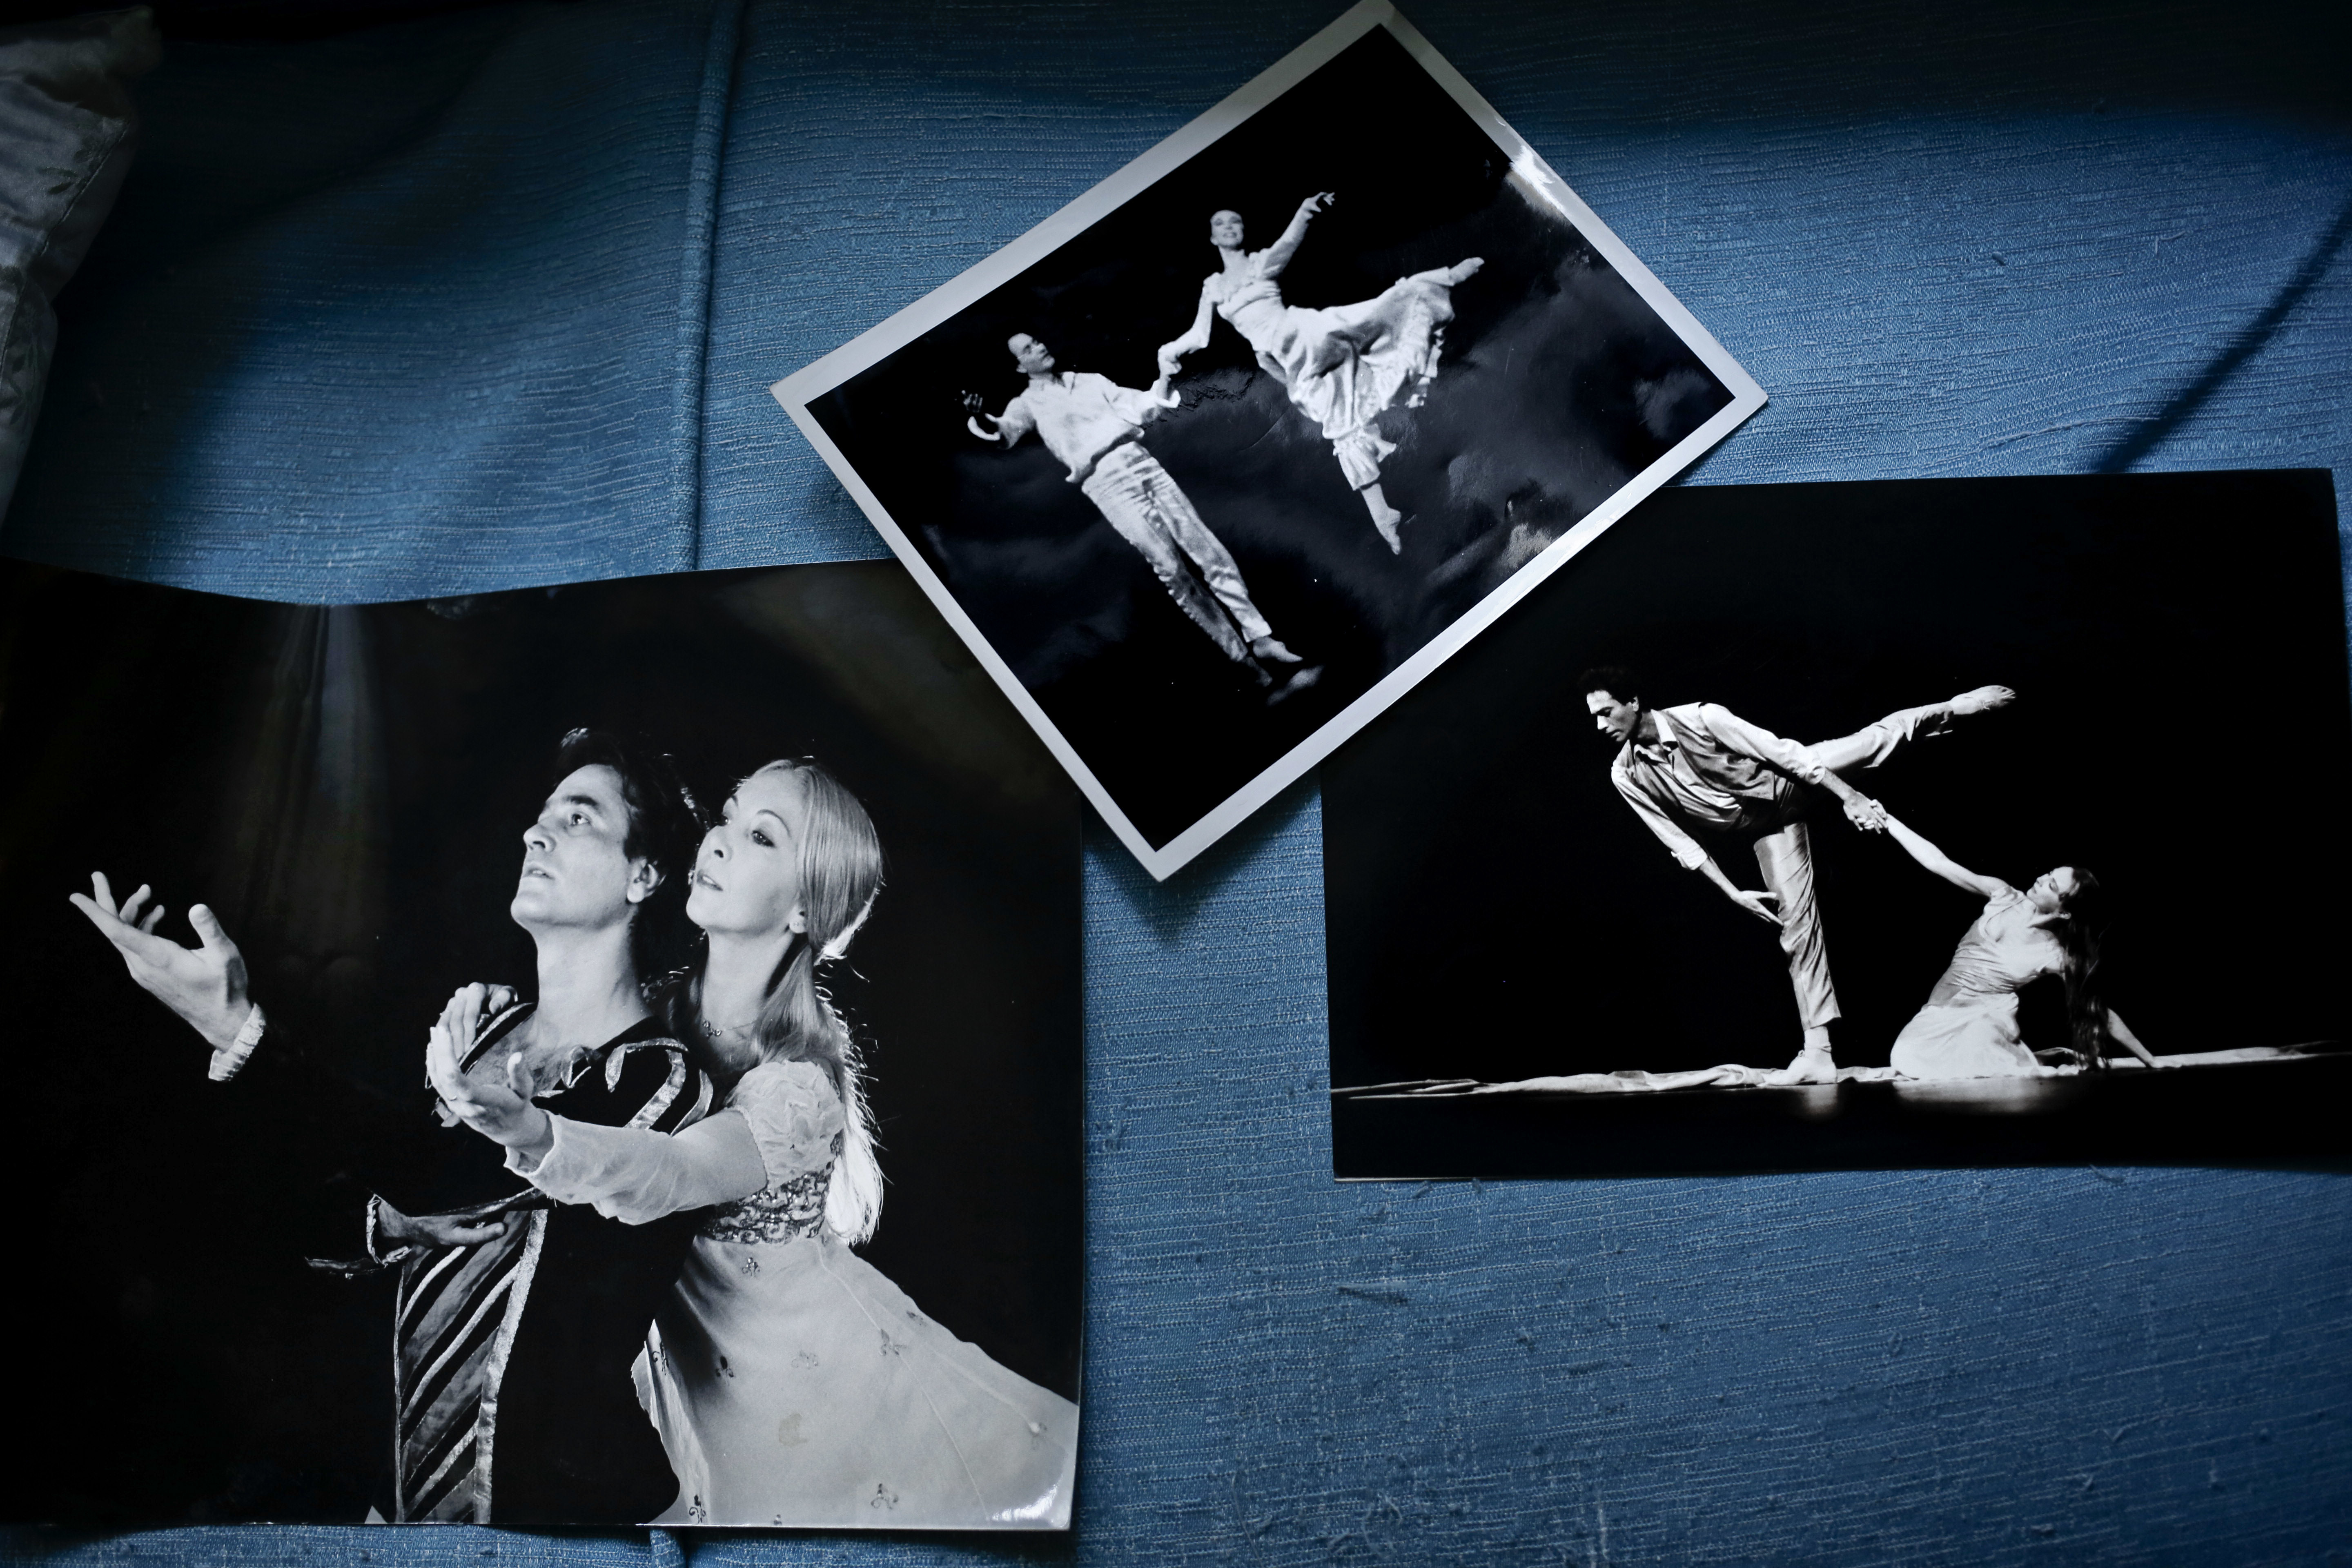 This April 14, 2017 photo, shows a display of old photographs of the late Abdel-Moneim Kamel and his wife Madame Erminia Gambarelli, the current artistic director of Egypt’s national ballet company, at their apartment in Garden City, Cairo, Egypt. Kamel, the giant of Egyptian ballet who rebuilt the company in the 1990s, mentored many of its current dancers and died in 2013. The national ballet company is rebuilding after years of political turmoil and economic pain. (AP Photo/Nariman El-Mofty)